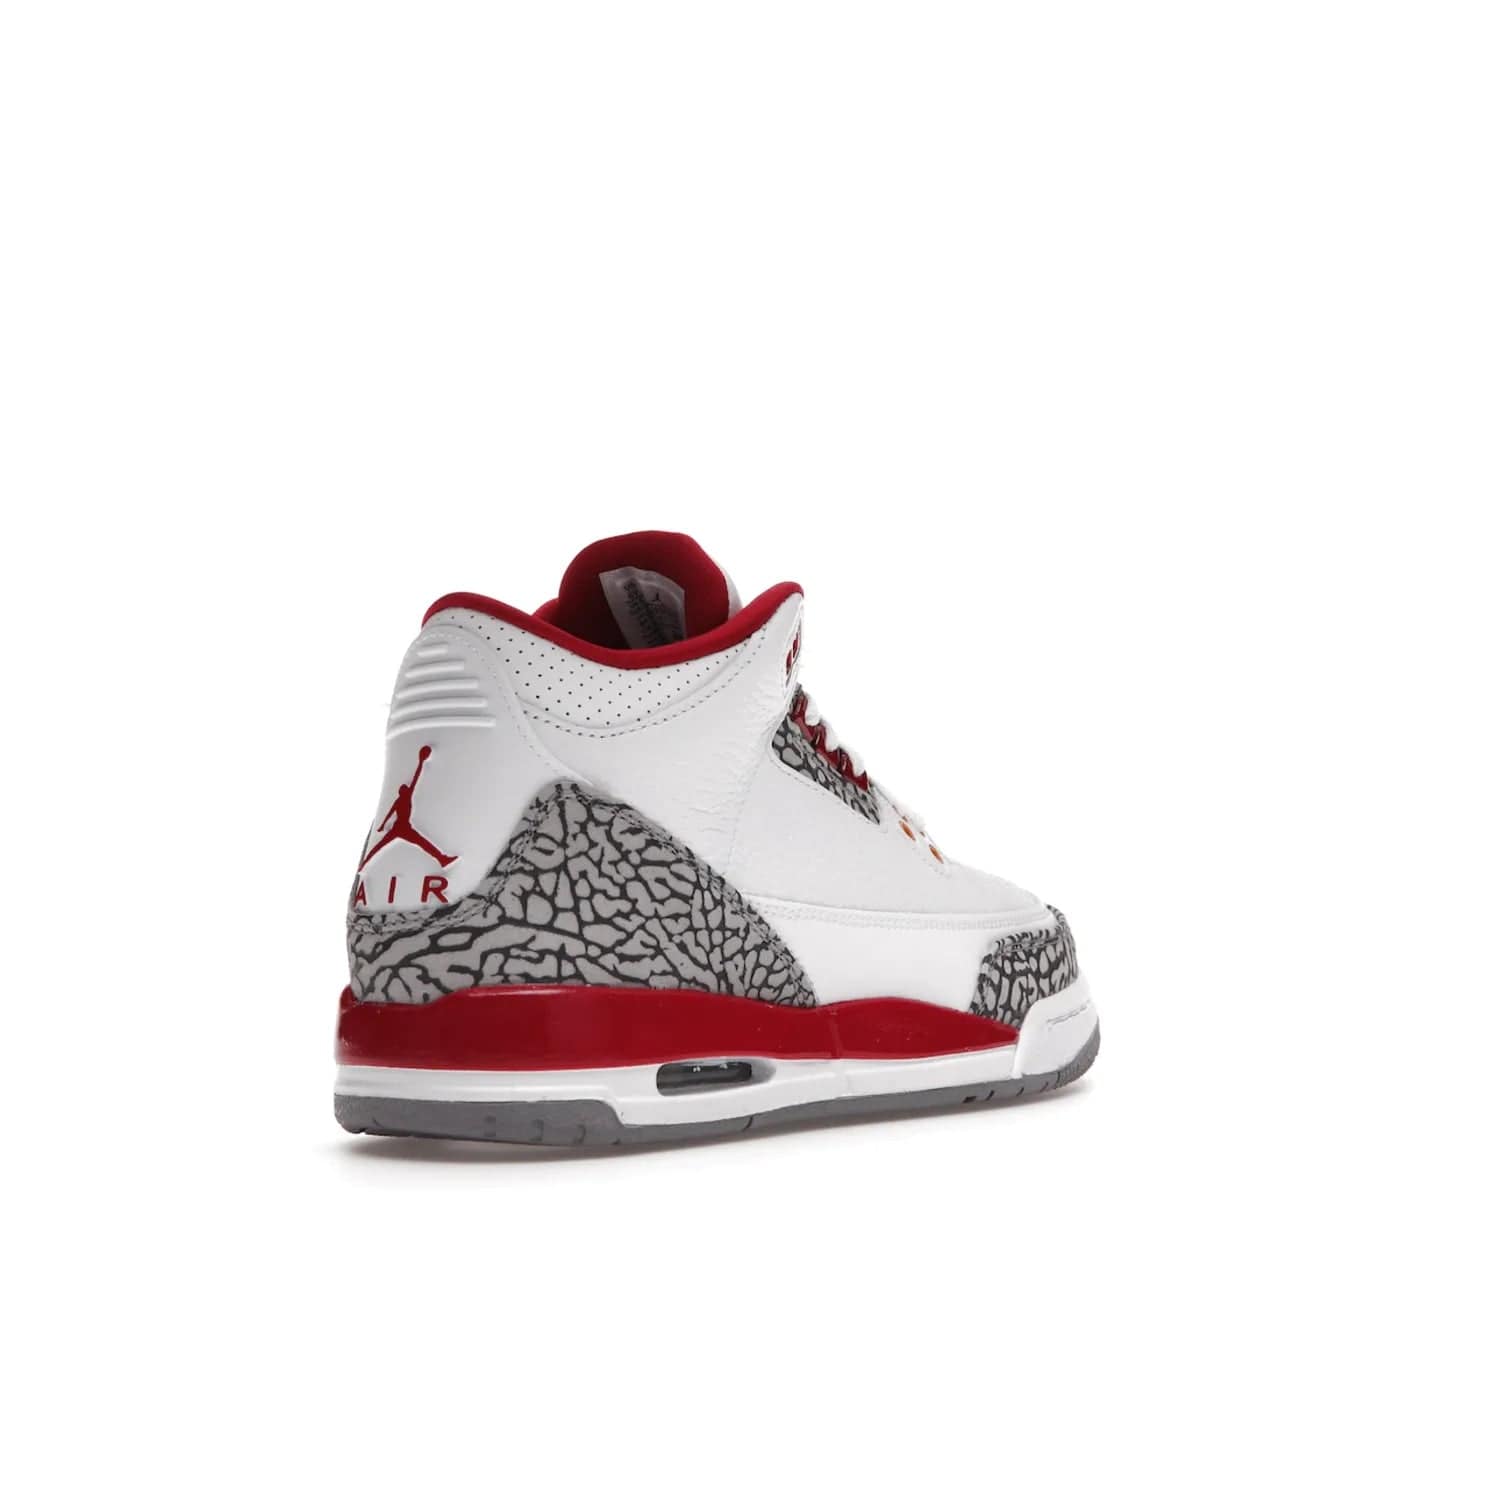 Jordan 3 Retro Cardinal (GS) - Image 32 - Only at www.BallersClubKickz.com - Shop the kid-sized Air Jordan 3 Retro Cardinal GS, released Feb 2022. White tumbled leather upper, light curry accenting, cement grey and classic red details throughout. Visible Air cushioning, midsole, and an eye-catching outsole. Show off your style with this fashionable streetwear silhouette.